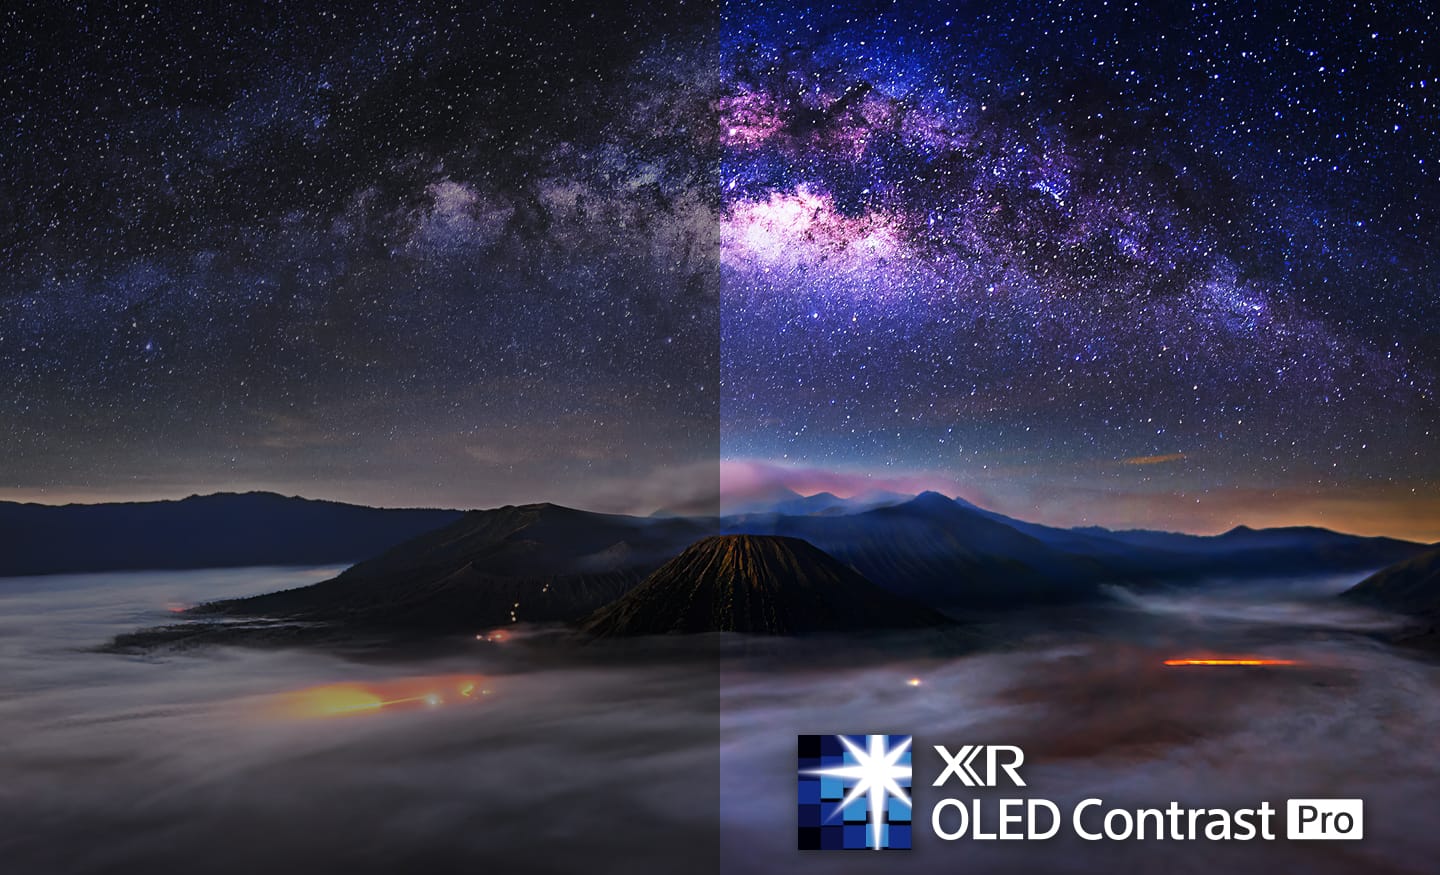 XR OLED contrast pro